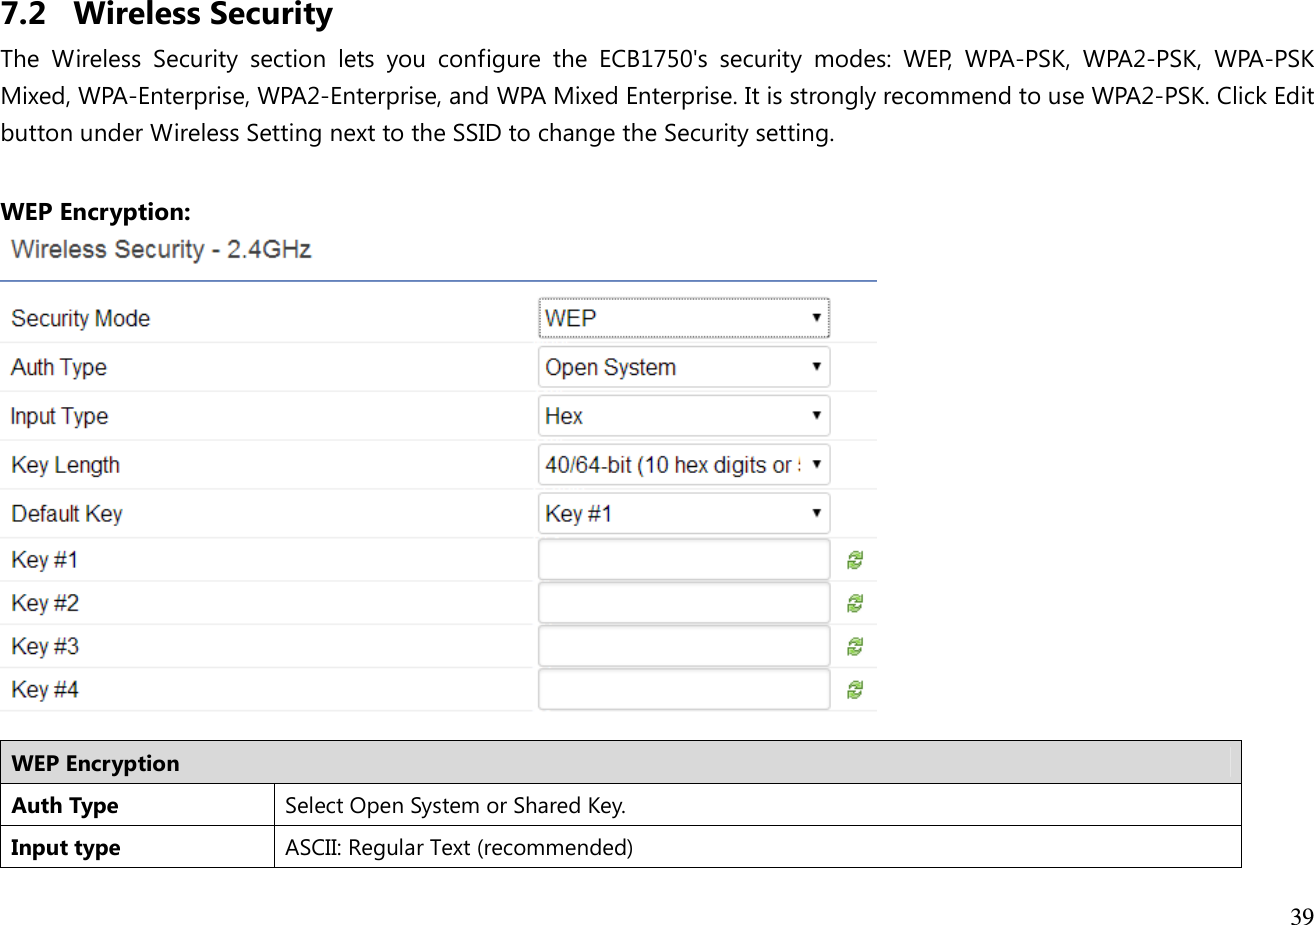  39   7.2 Wireless Security The  Wireless  Security  section  lets  you  configure  the  ECB1750&apos;s  security  modes:  WEP,  WPA-PSK,  WPA2-PSK,  WPA-PSK Mixed, WPA-Enterprise, WPA2-Enterprise, and WPA Mixed Enterprise. It is strongly recommend to use WPA2-PSK. Click Edit button under Wireless Setting next to the SSID to change the Security setting.  WEP Encryption:   WEP Encryption Auth Type Select Open System or Shared Key. Input type ASCII: Regular Text (recommended) 